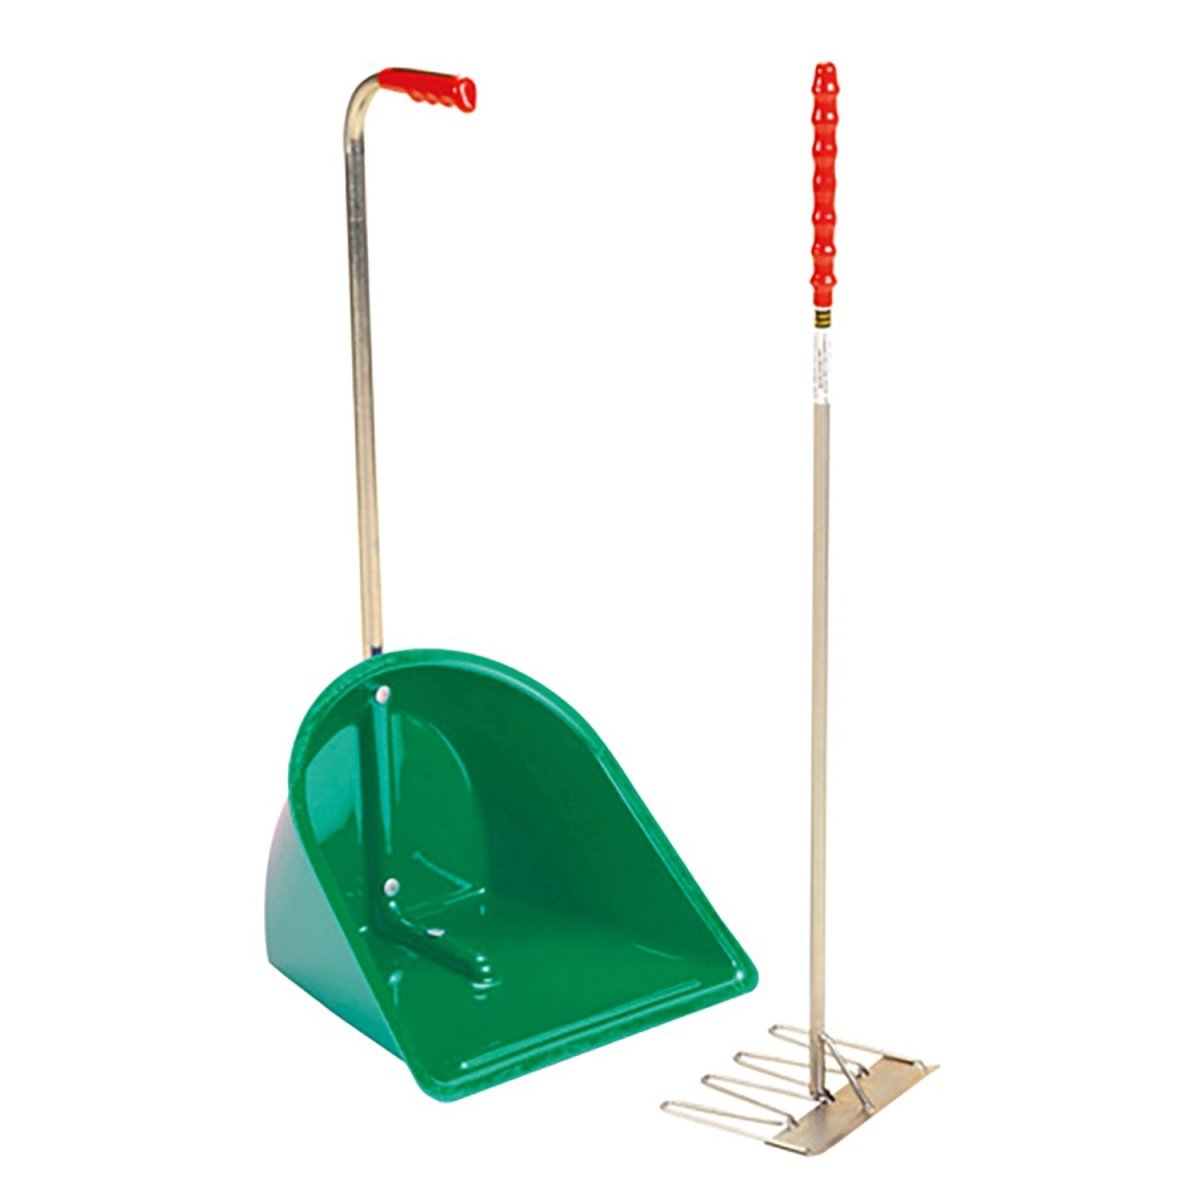 Stubbs Stable Mate Manure Collector High with Rake - Green -